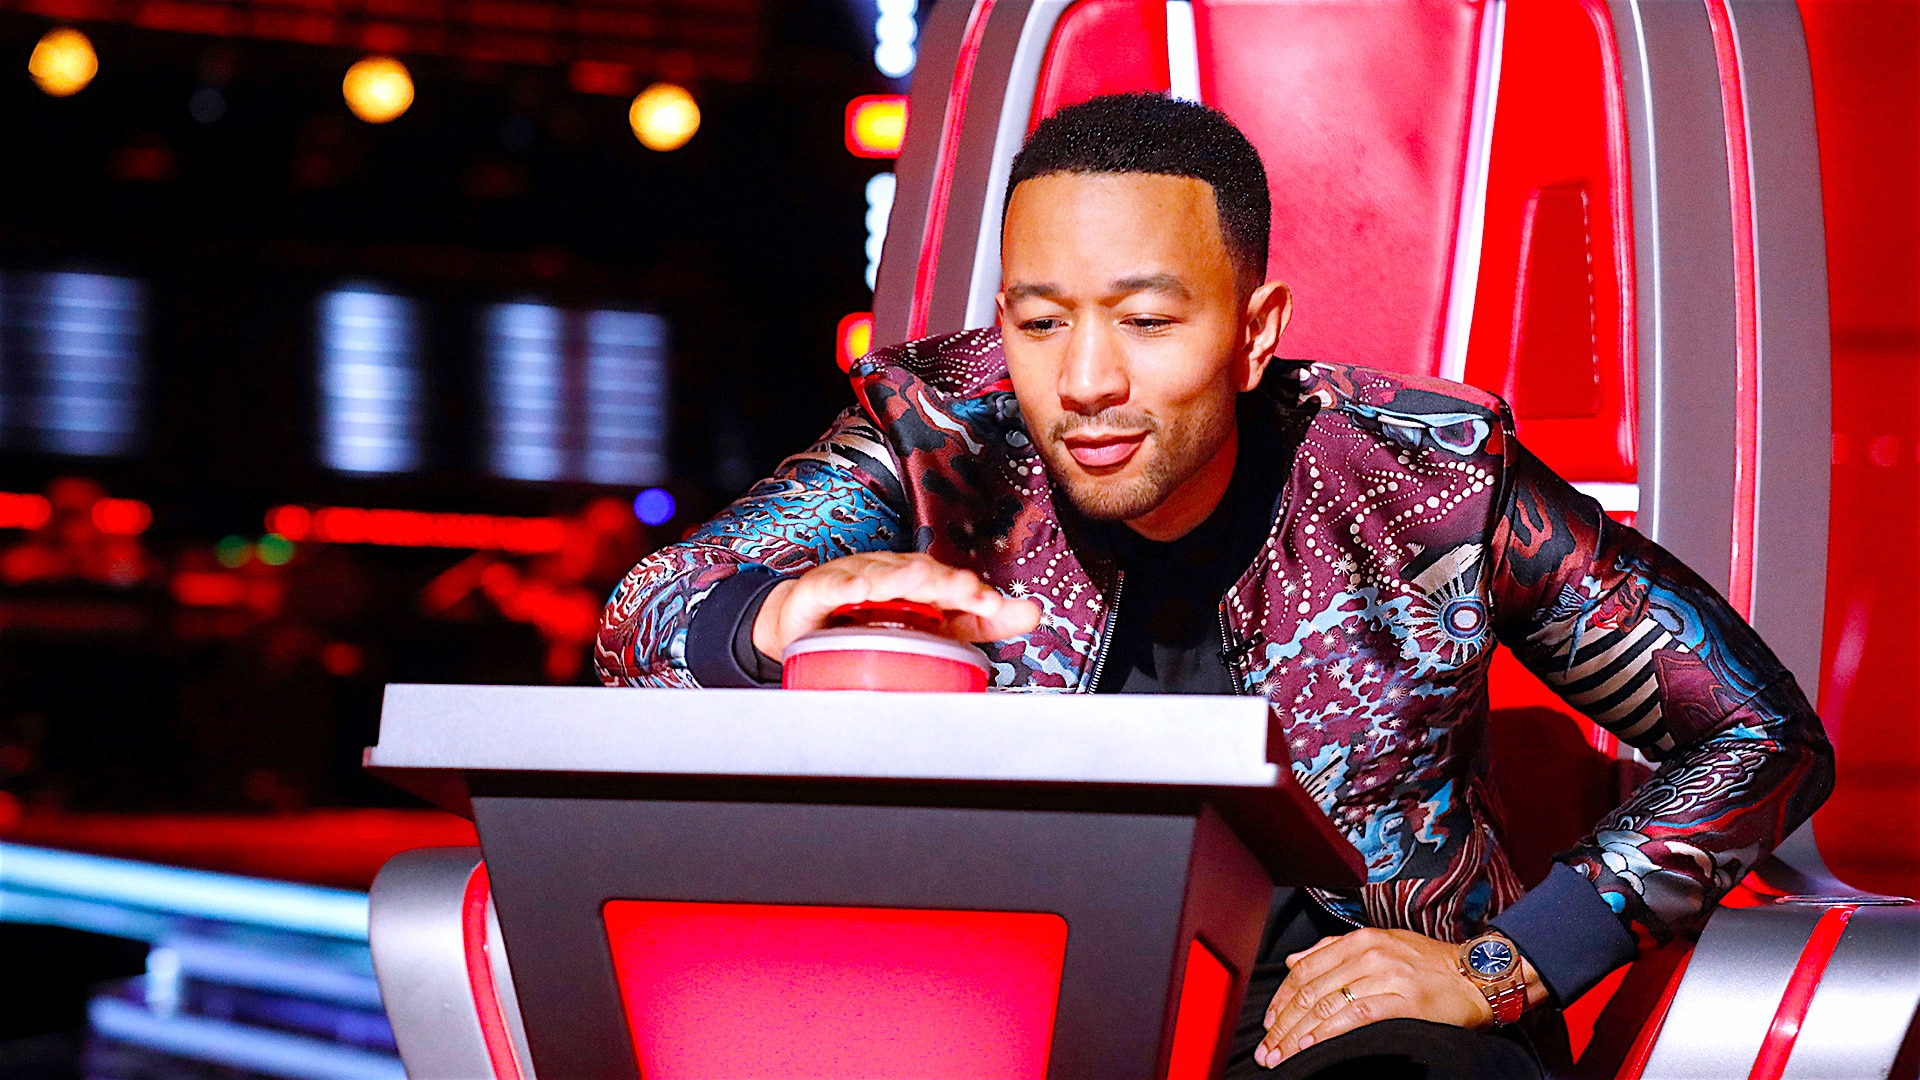 Watch The Voice Episode The Blind Auditions Premiere, Part 2